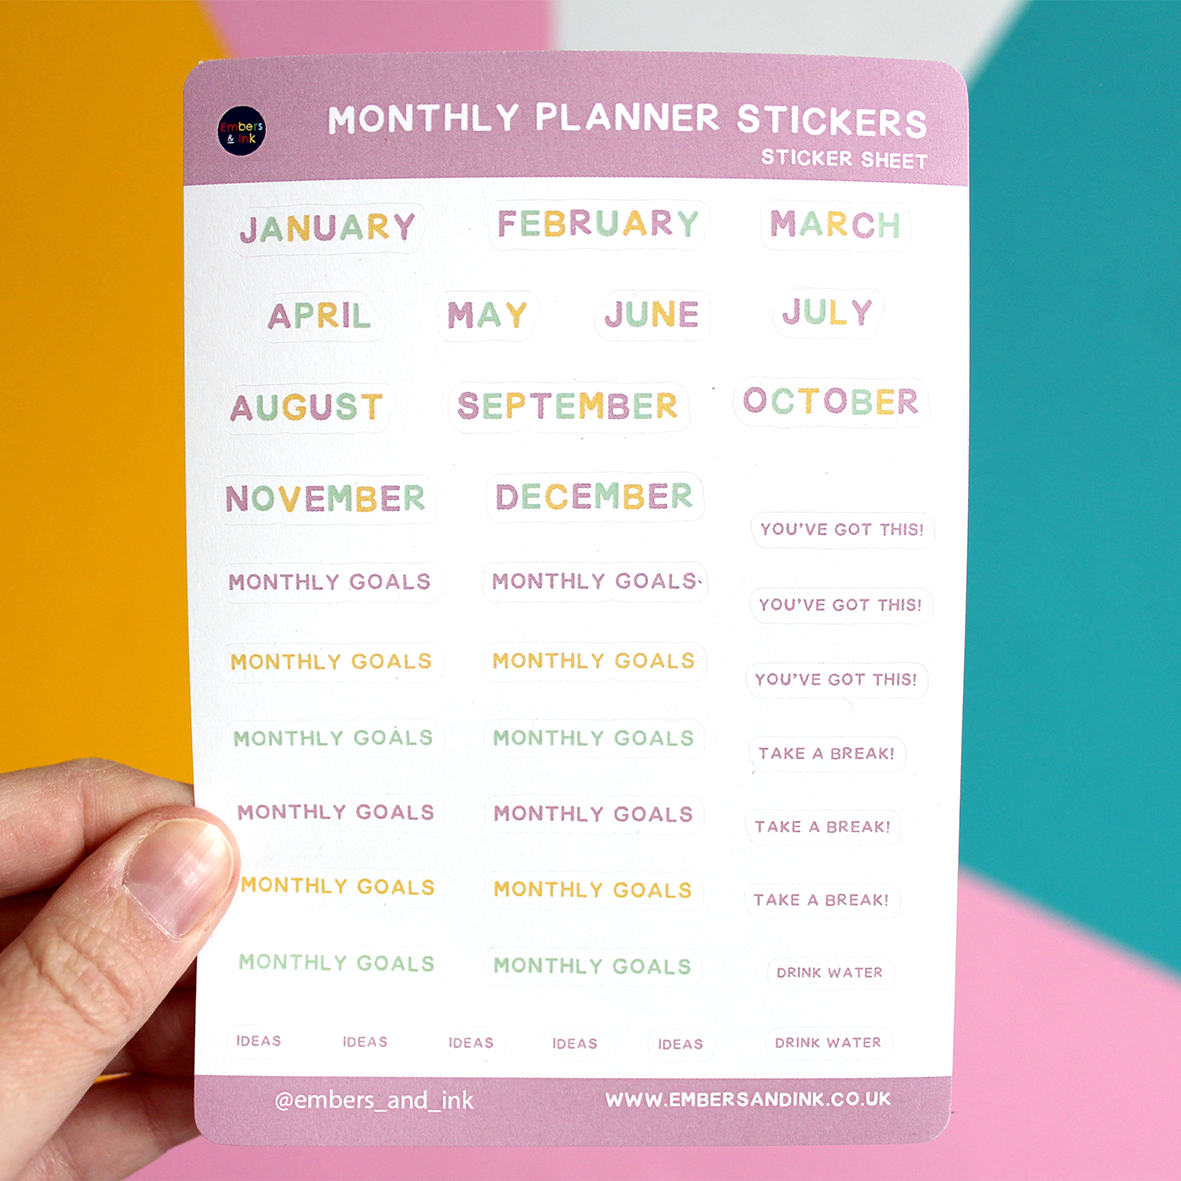 A hand holds the Monthly Planner sticker sheet in front of a colourful wall. The months of the near have their own stickers, plus  12 'monthly goals' stickers. There are also stickers saying 'You've got his' ' take a break' 'drink water' and 'ideas'.